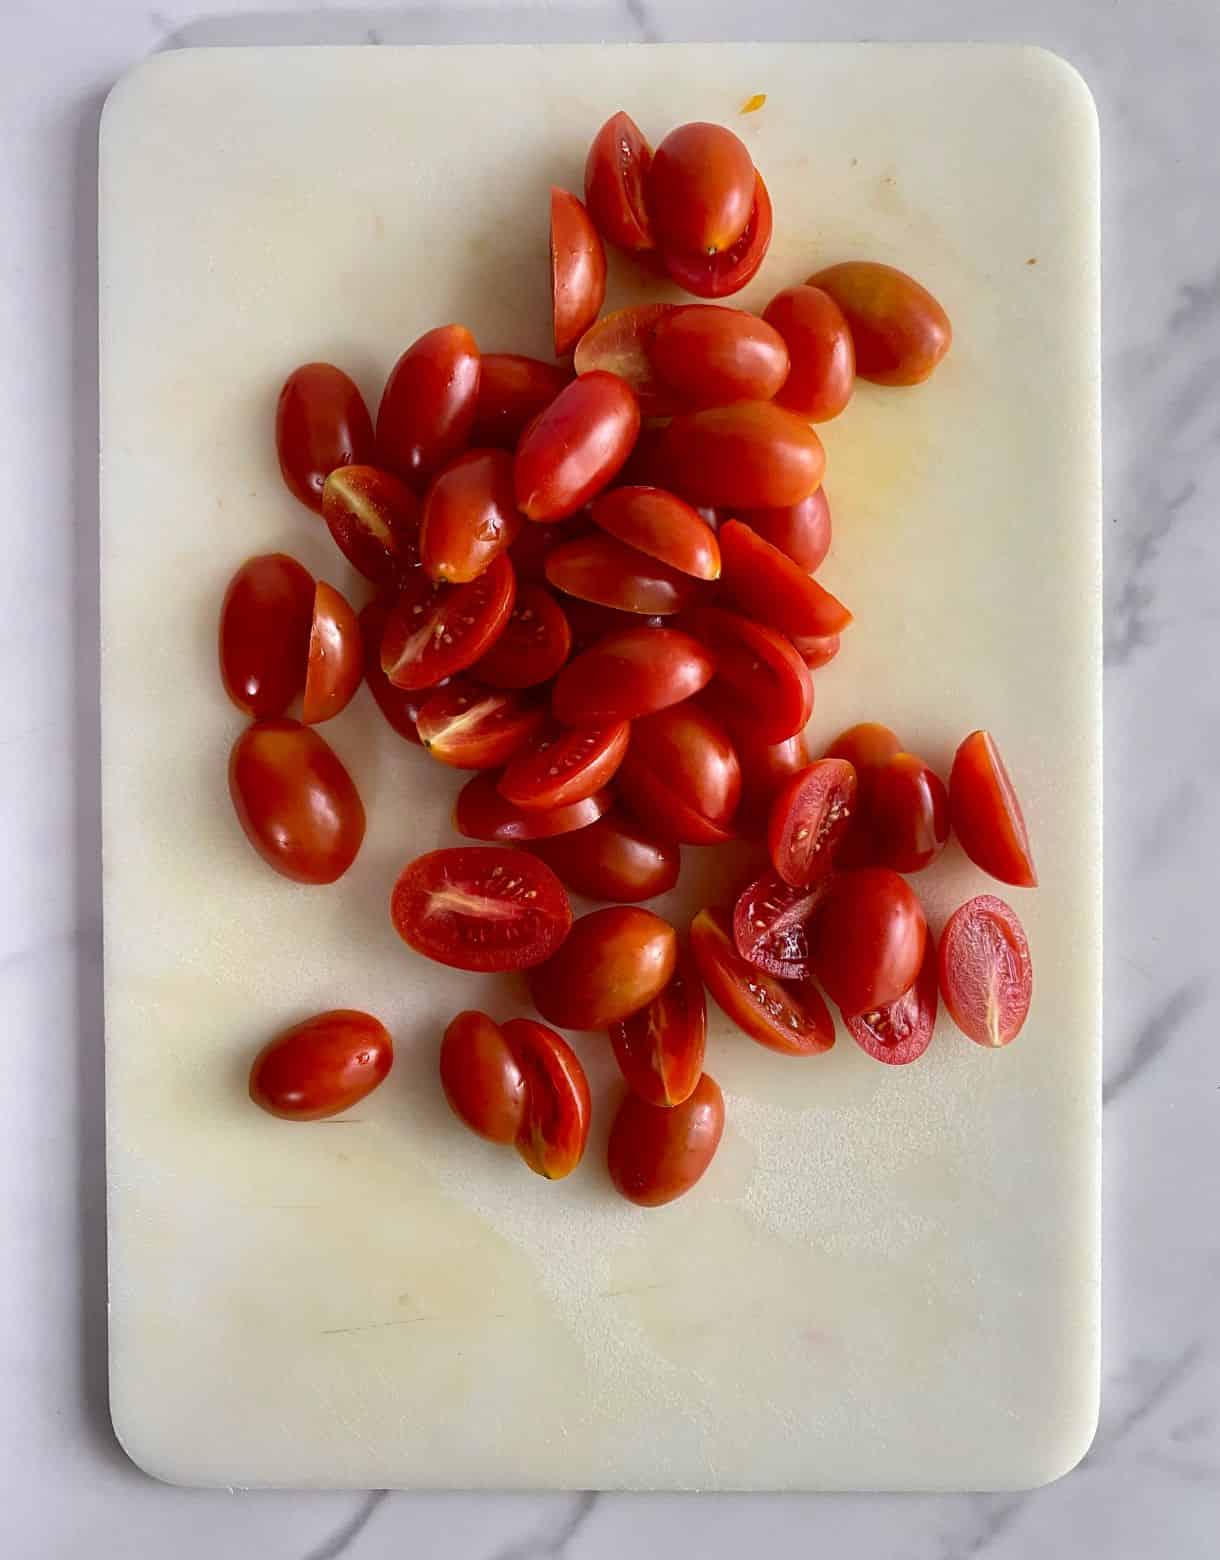 A cutting board with sliced grape tomatoes.